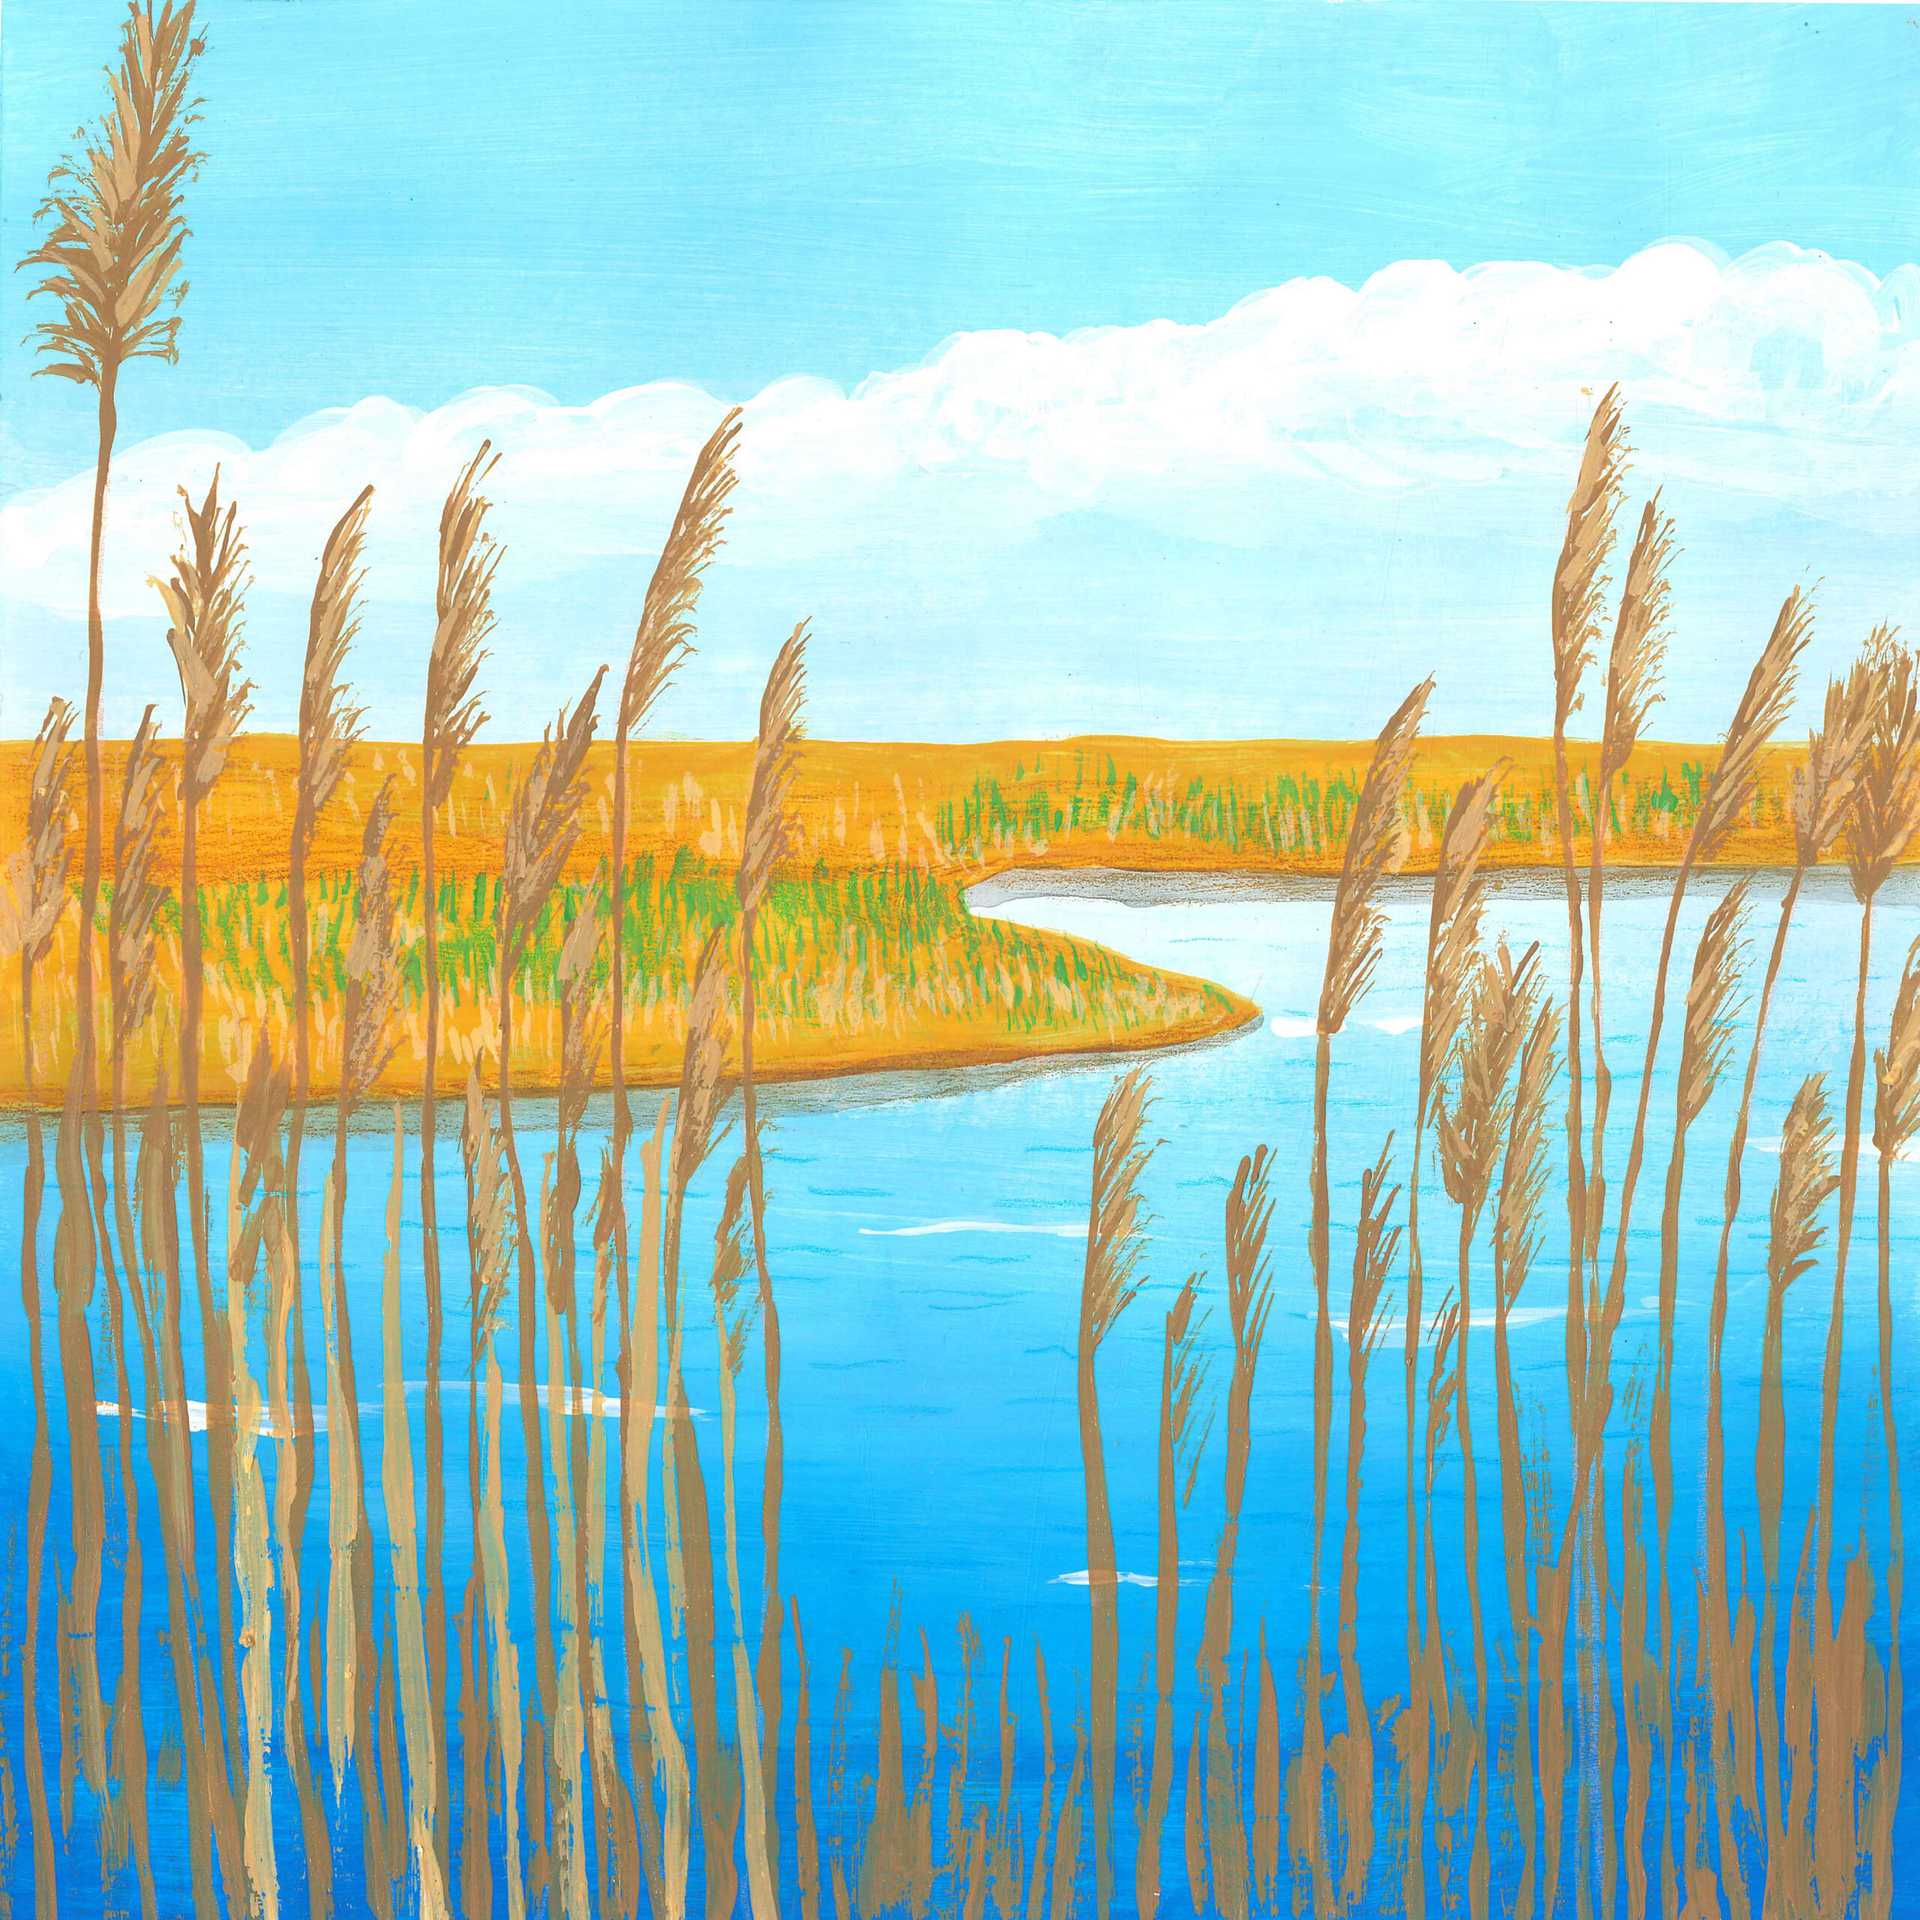 Seagulls and Swamp Reeds - nature soundscape - earth.fm